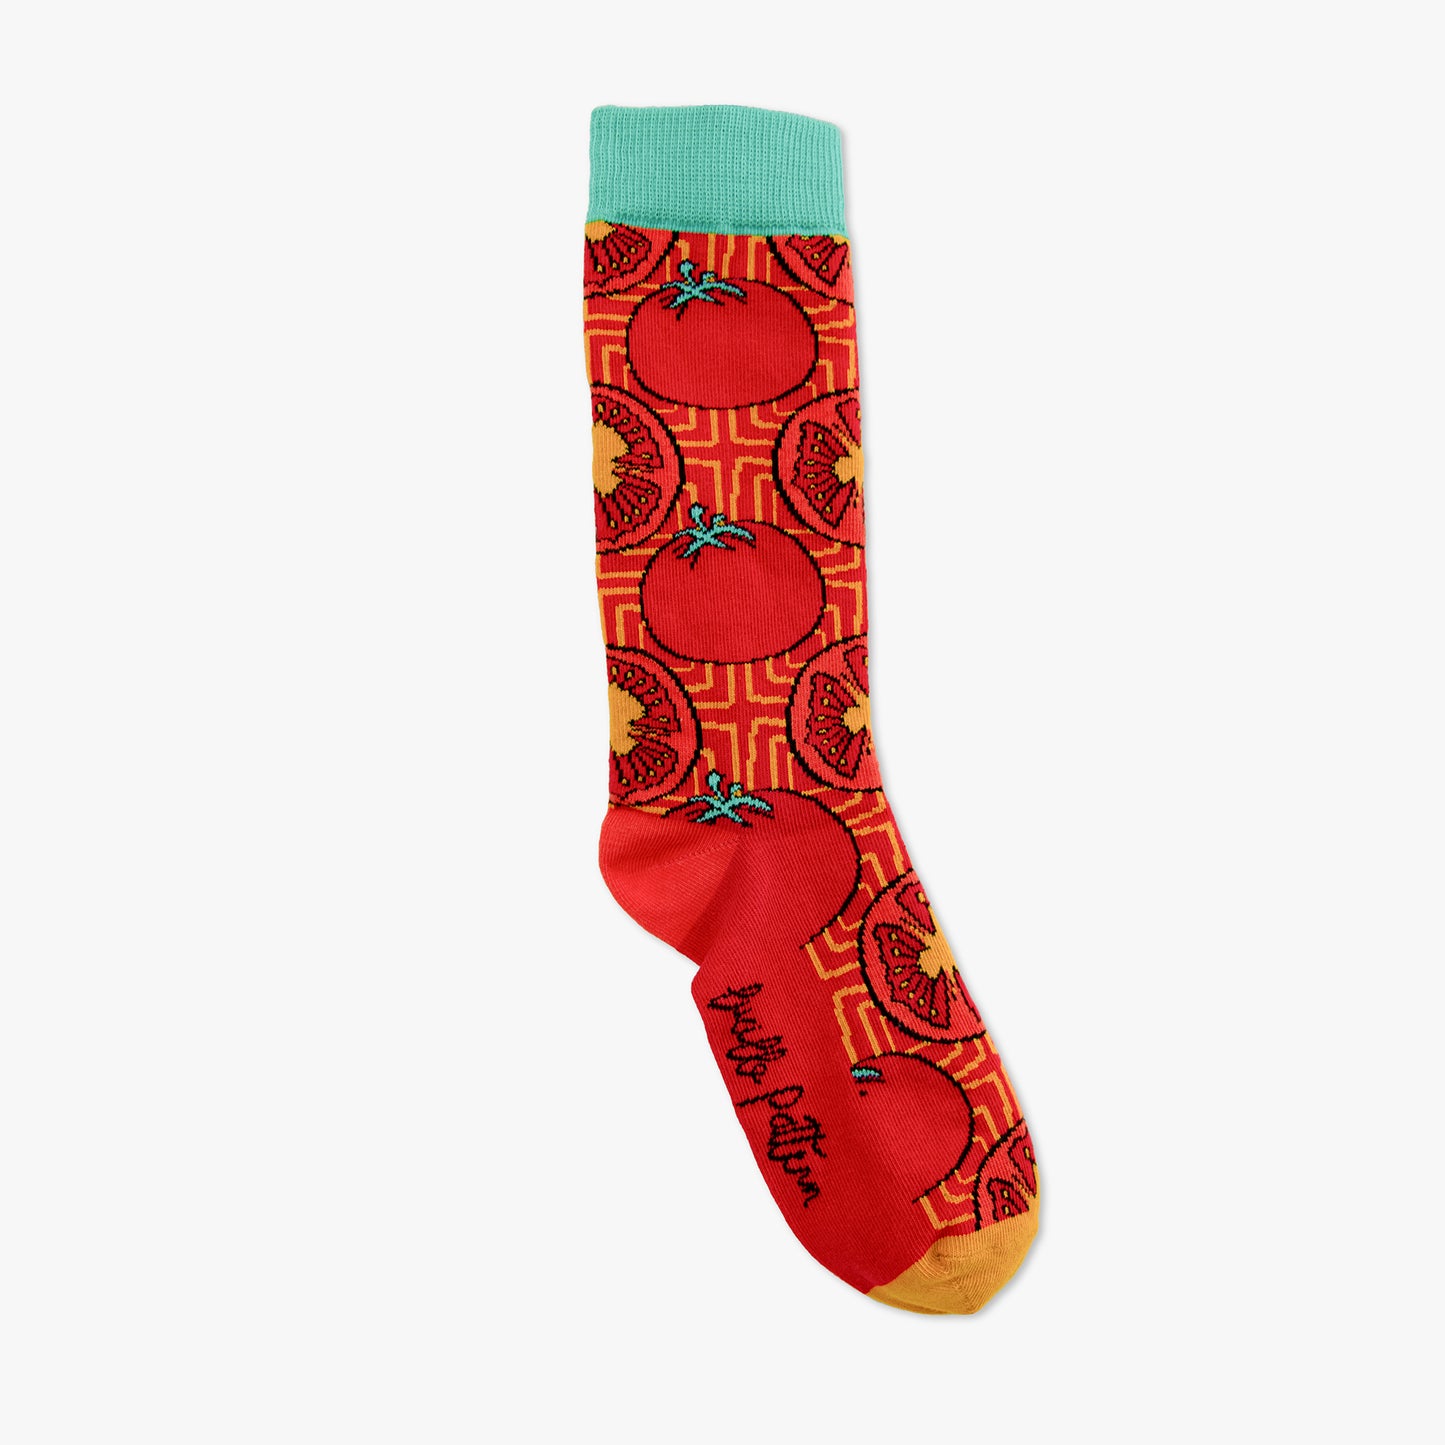 Chaussettes made in france tomates rouge jaune